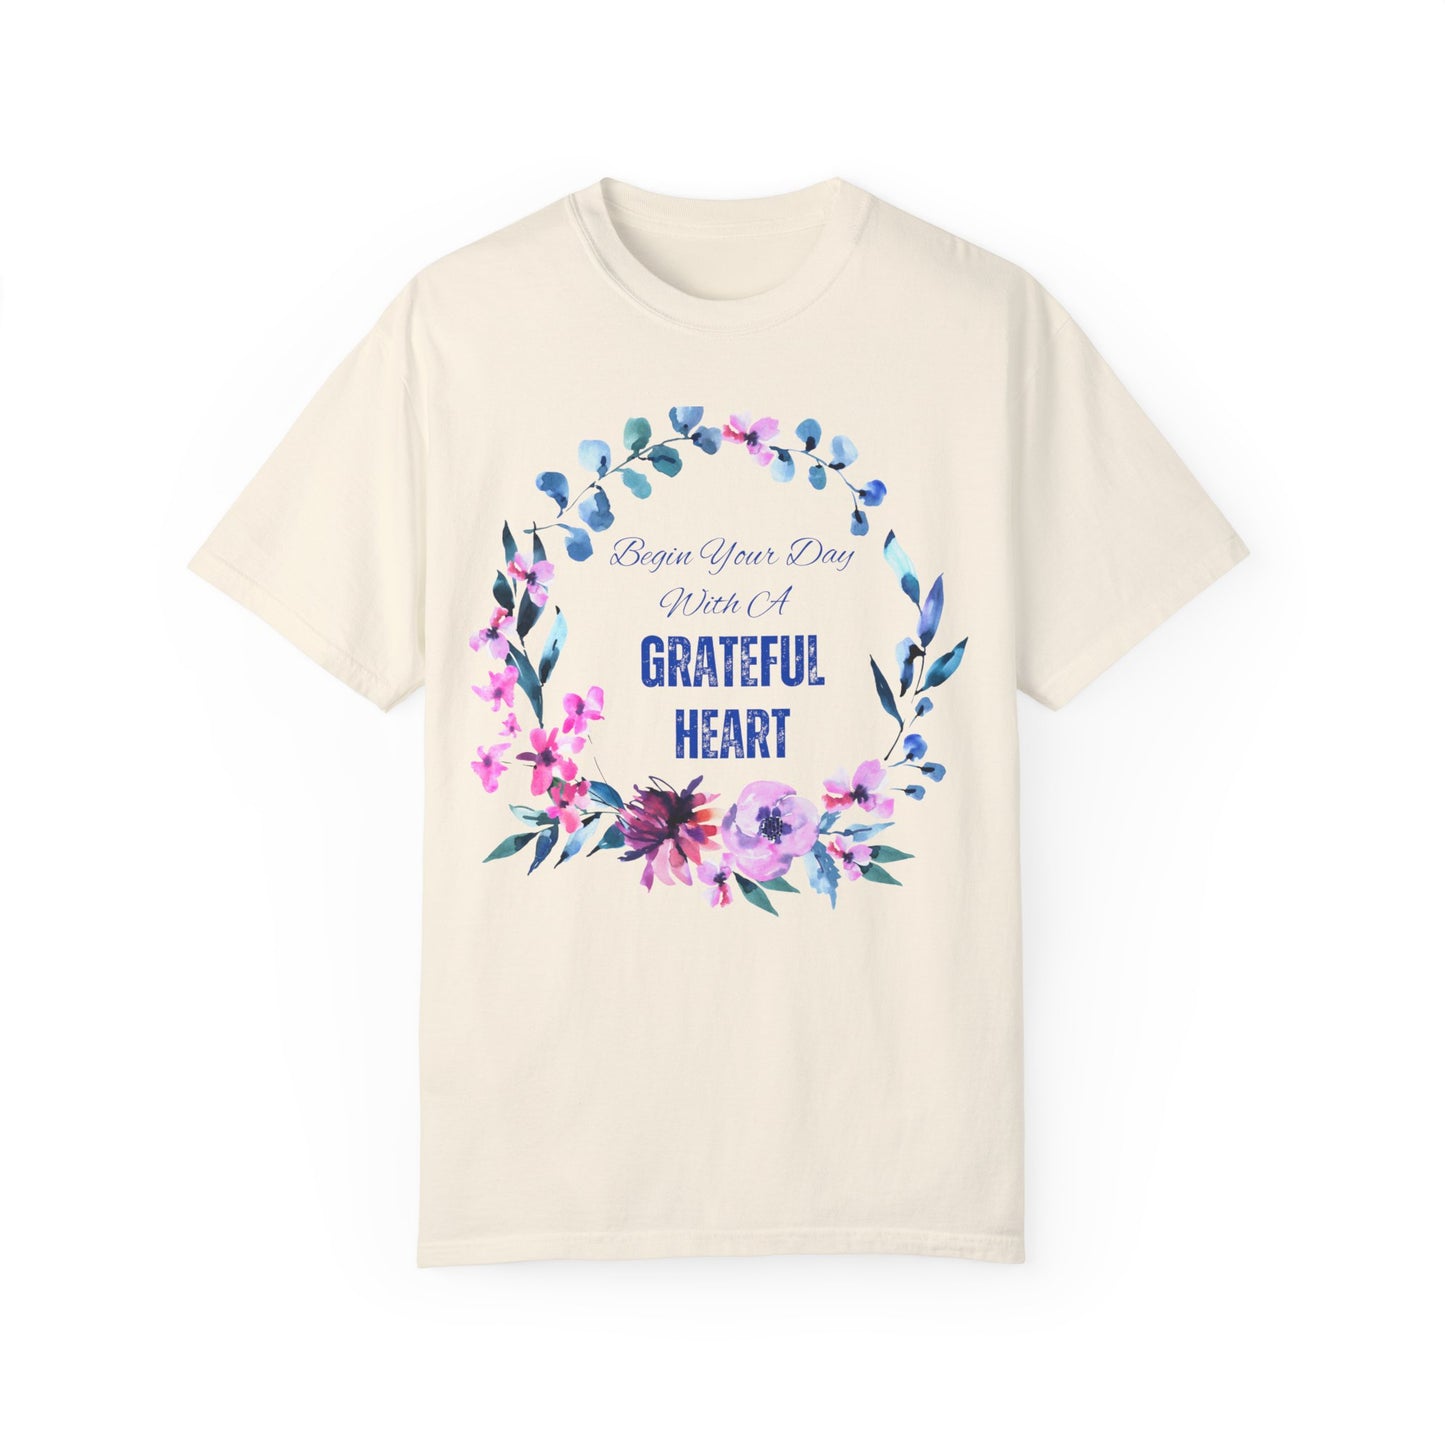 Begin Your Day With A Grateful Heart Garment-Dyed T-shirt, Inspirational Tshirt, Tshirt With Flower Wreath, Gifts For Her, Colorful T-Shirt